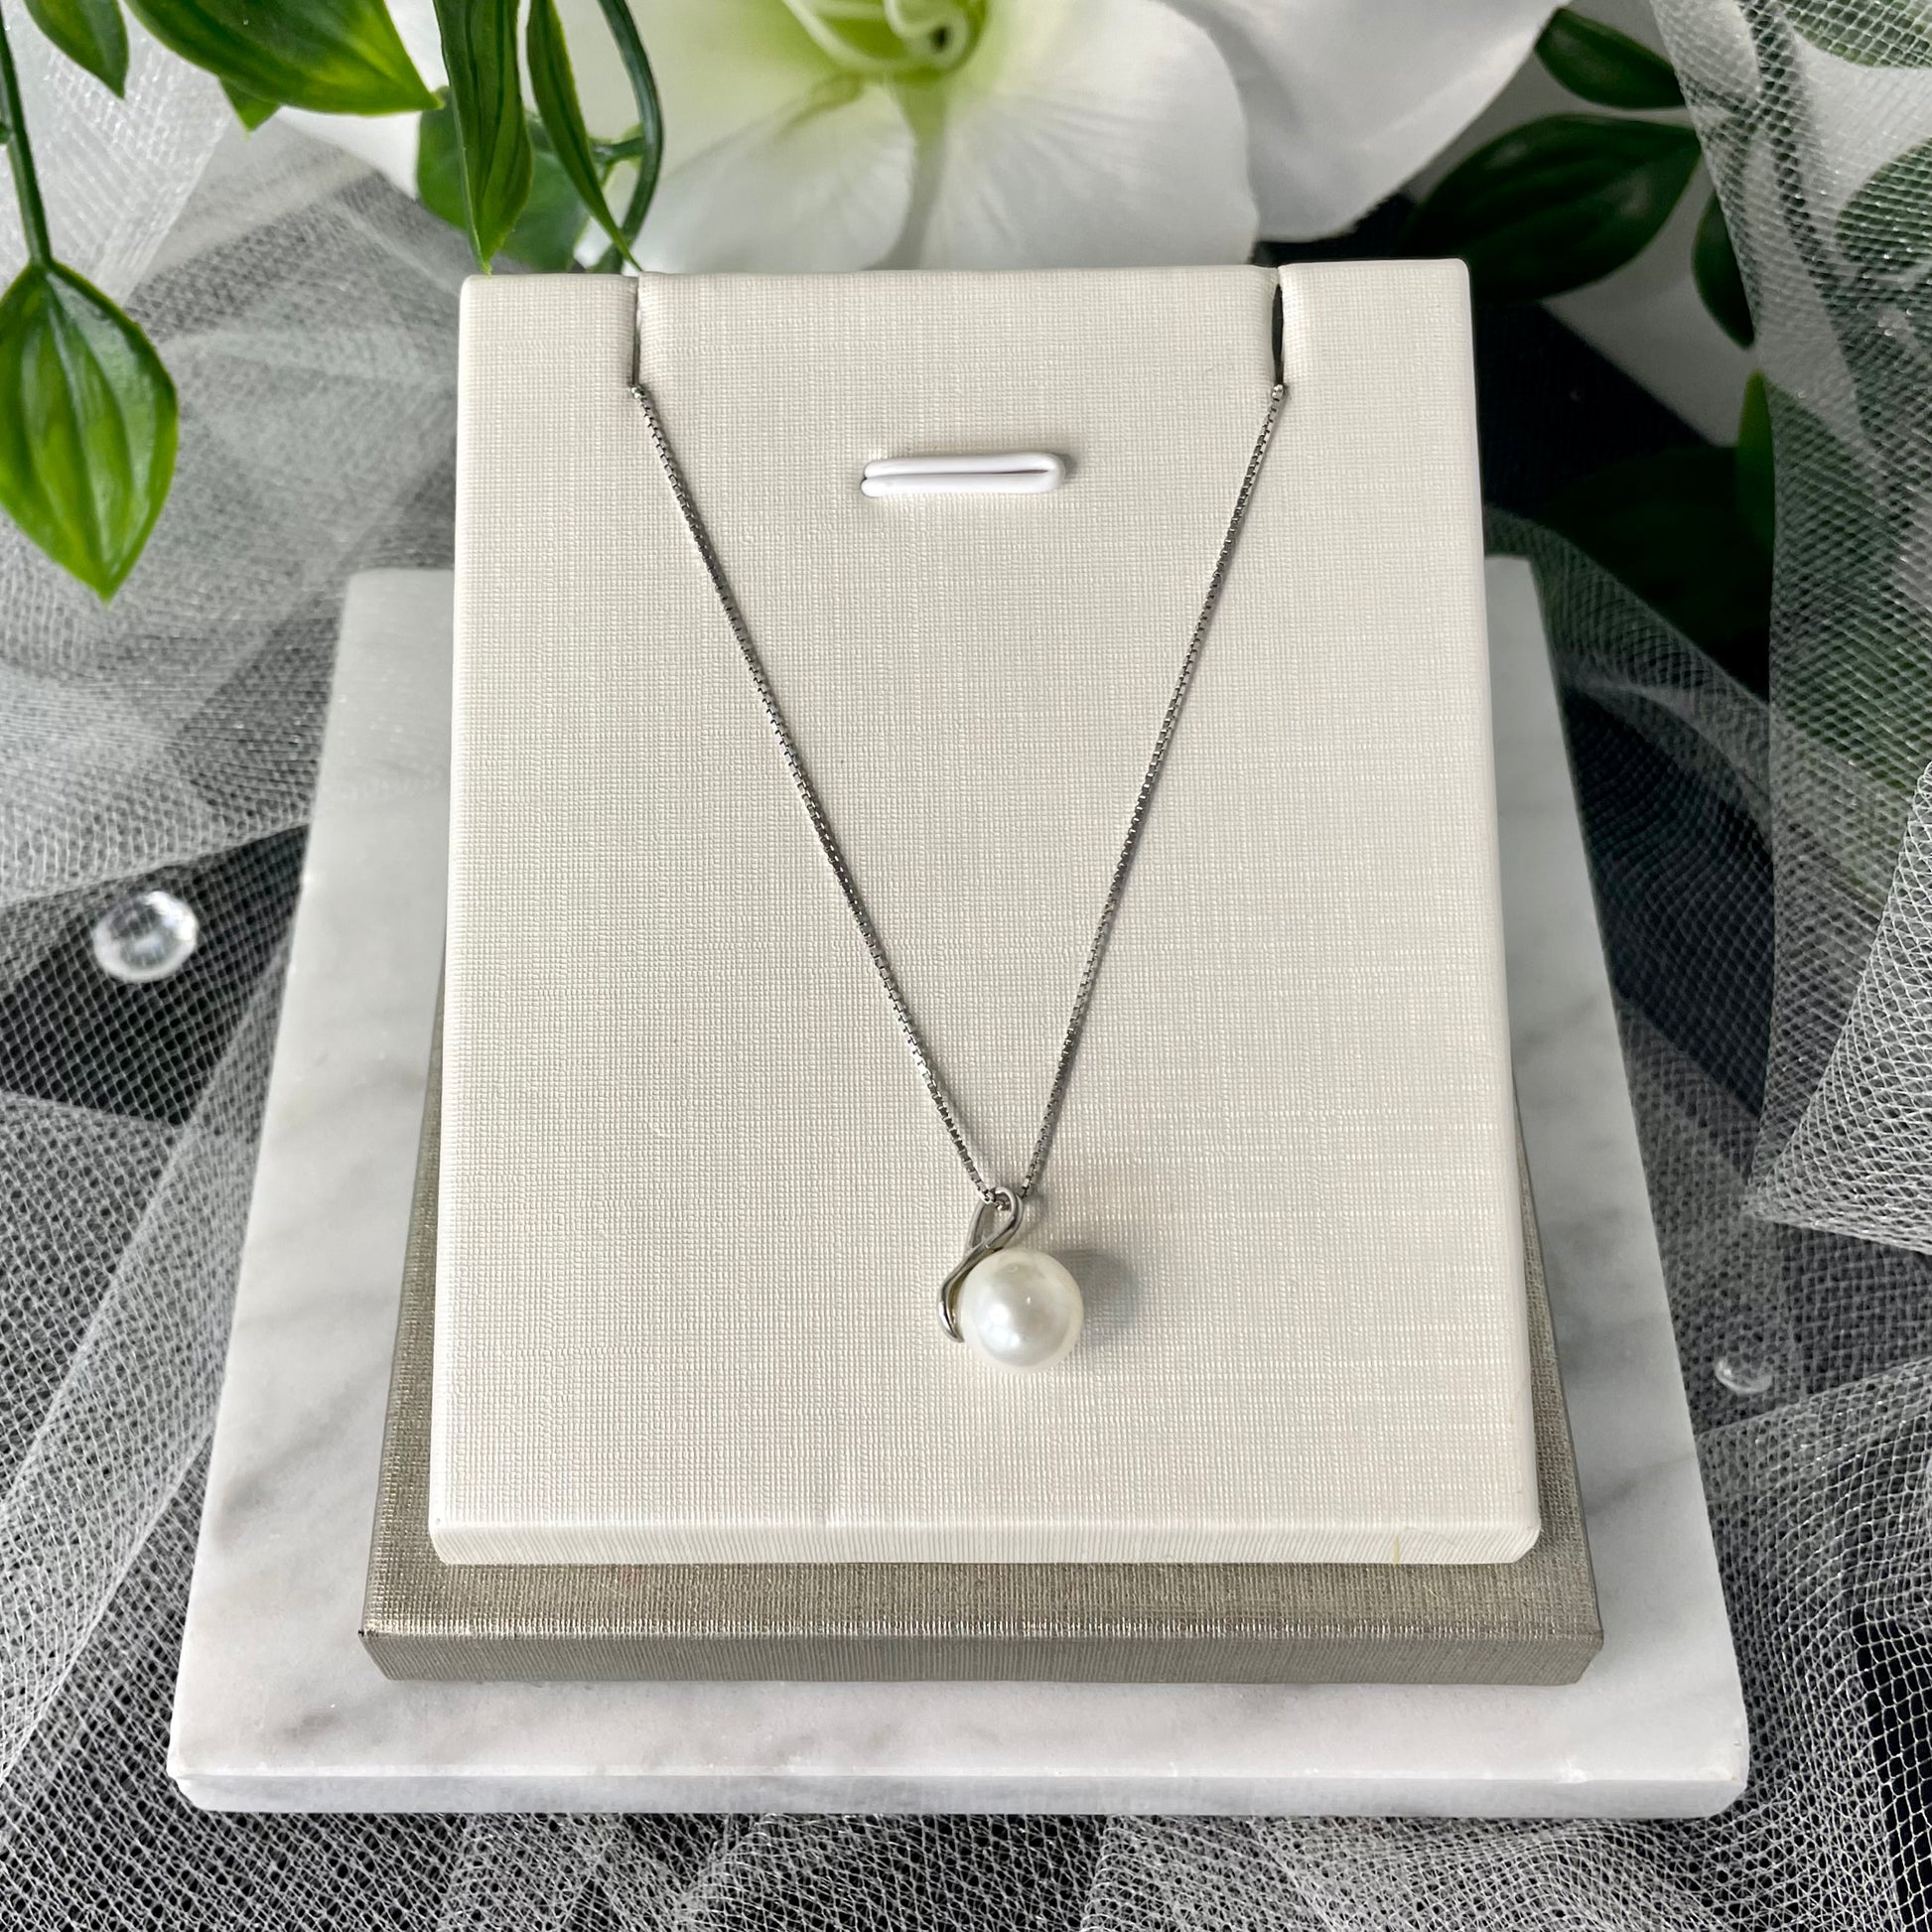 Sterling silver Camellia Pearl Necklace with 18k plating and shell imitation pearl pendant.